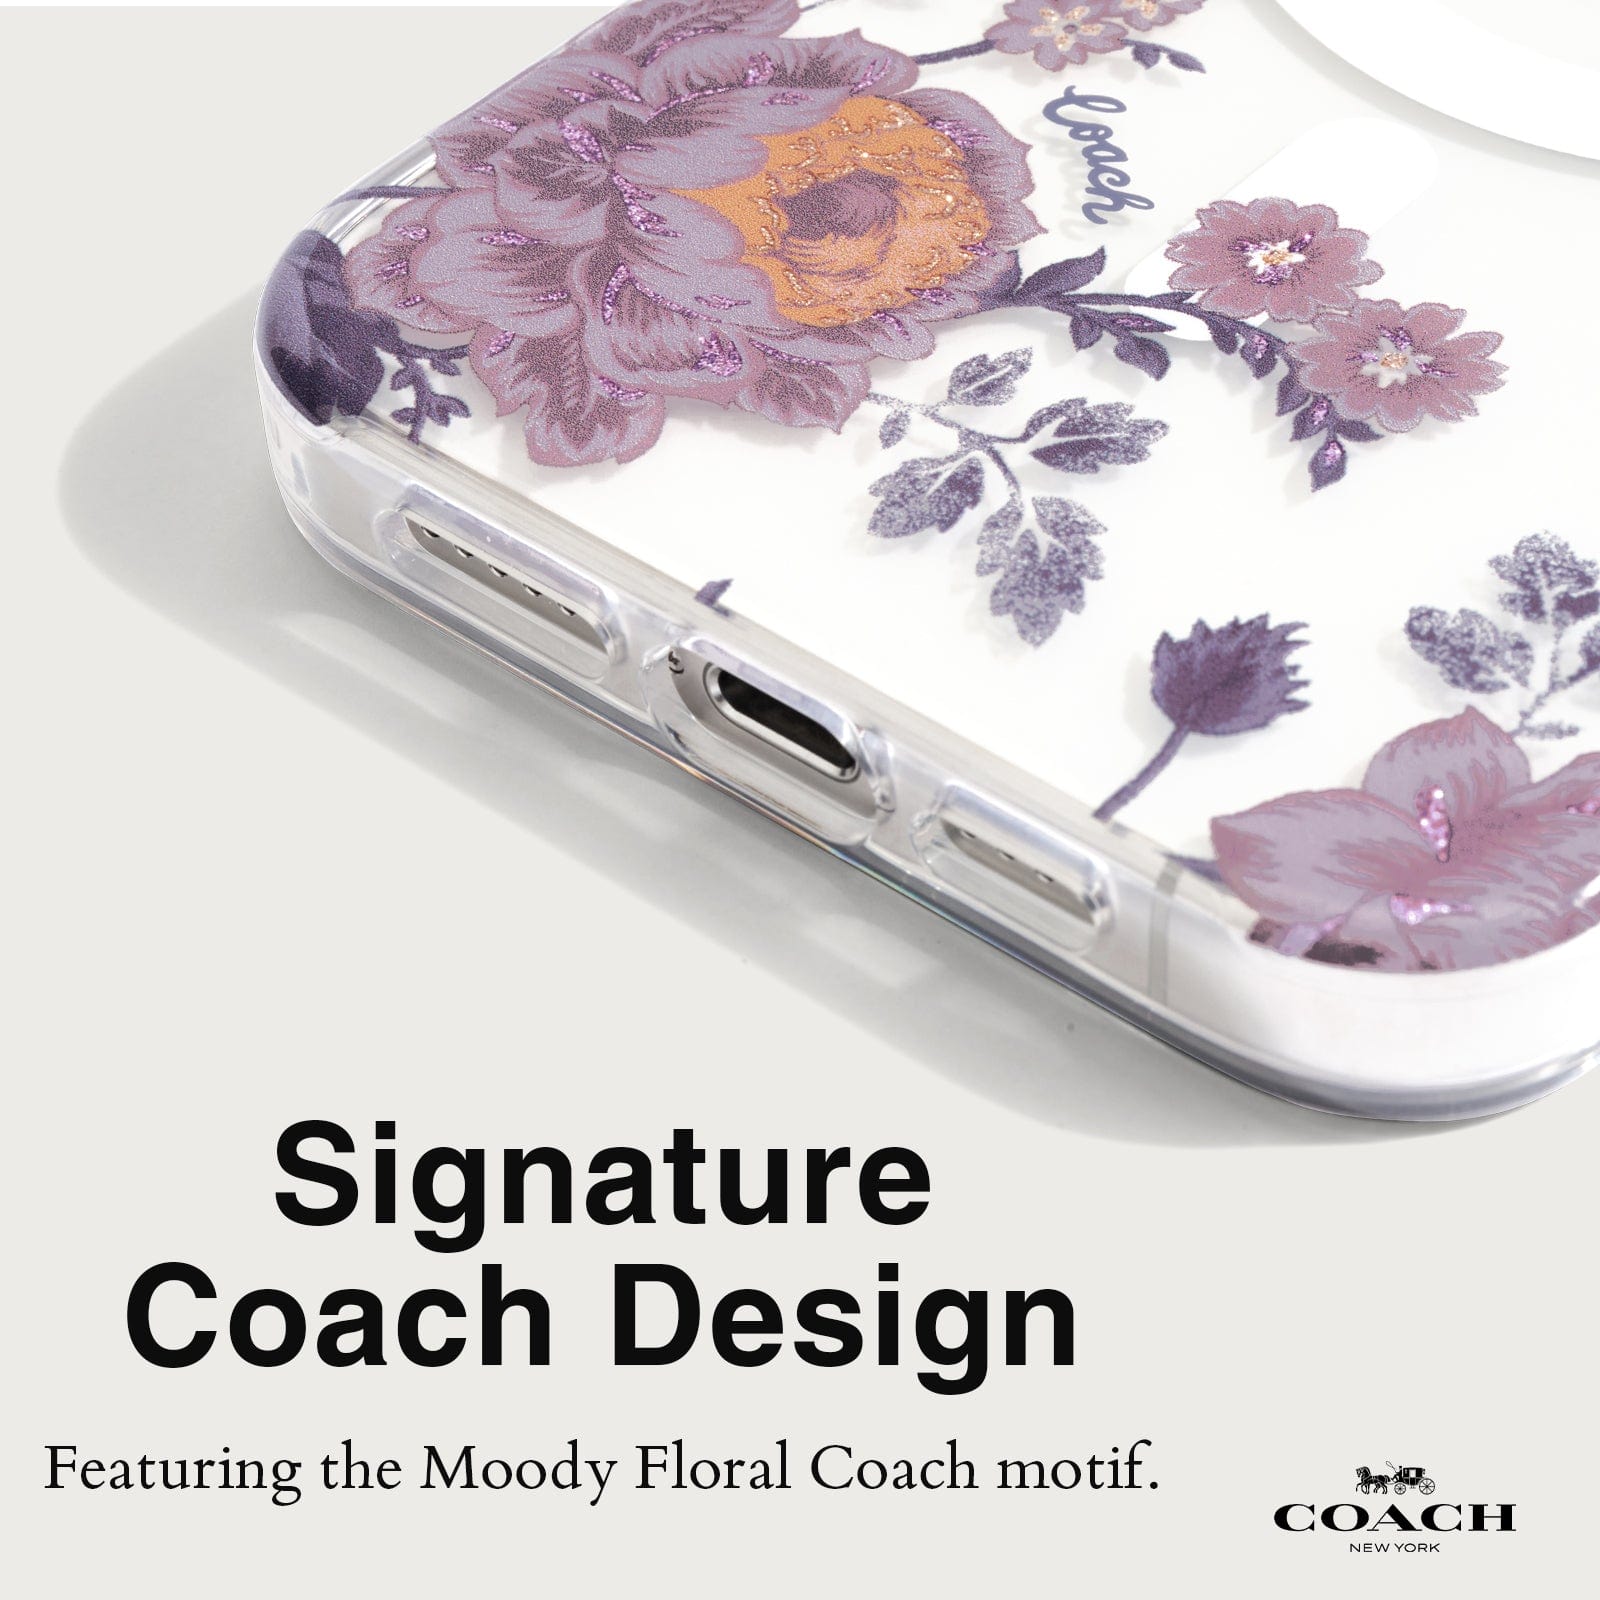 SIGNATURE COACH DESIGN. FEATURING THE MOODY FLORAL COACH MOTIF. 